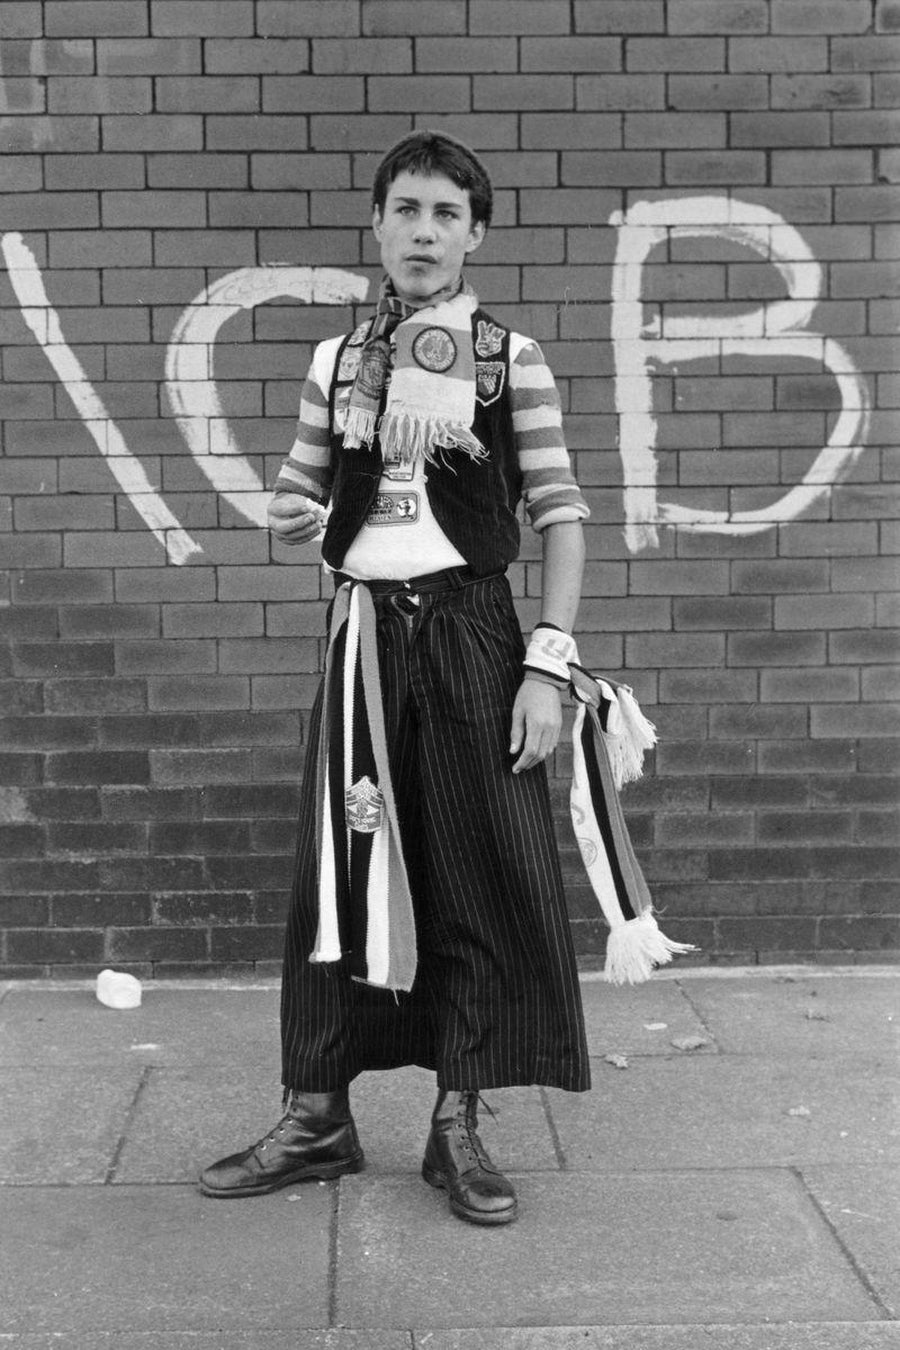 Skirt or Trousers? Manchester United Fan Dressed For the Match by Iain S. P. Reid, c. 1977.